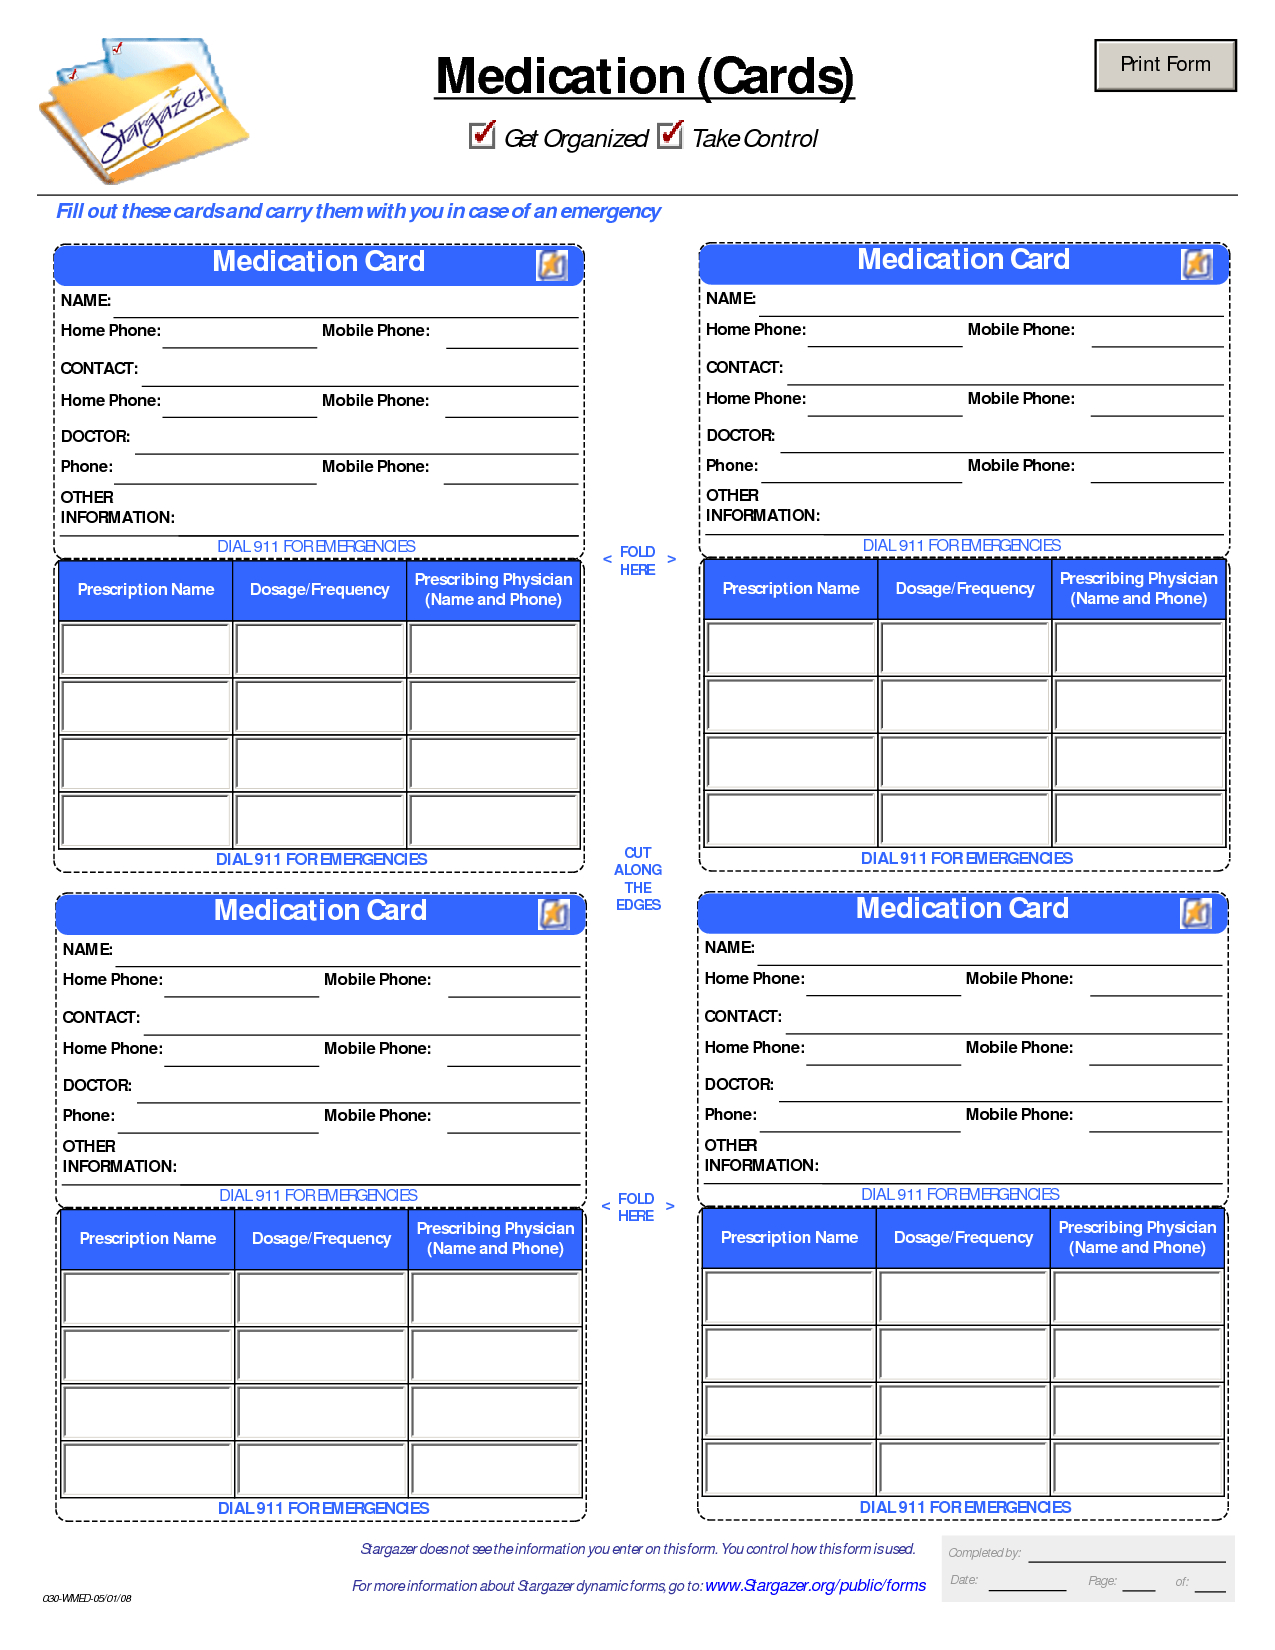 medication list templates - Ficim Throughout Medication Card Template